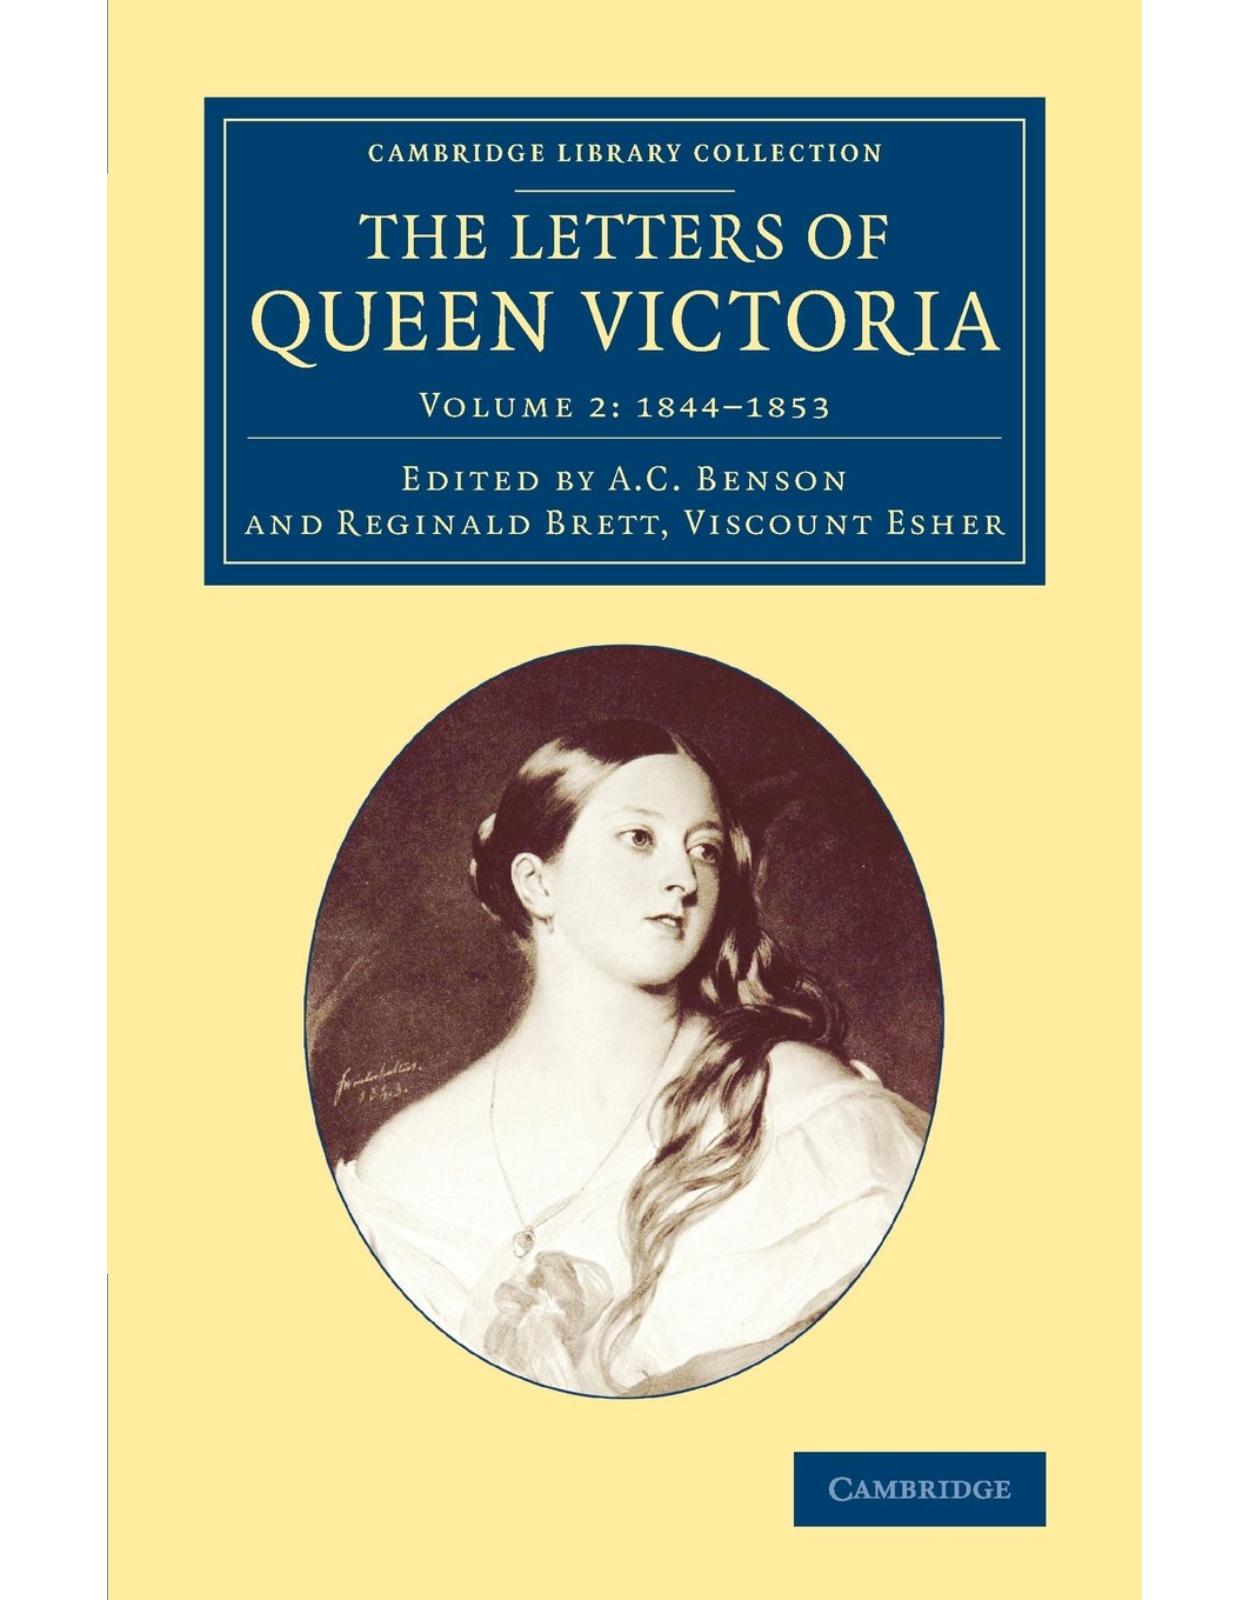 The Letters of Queen Victoria: Volume 2 (Cambridge Library Collection - British and Irish History, 19th Century)